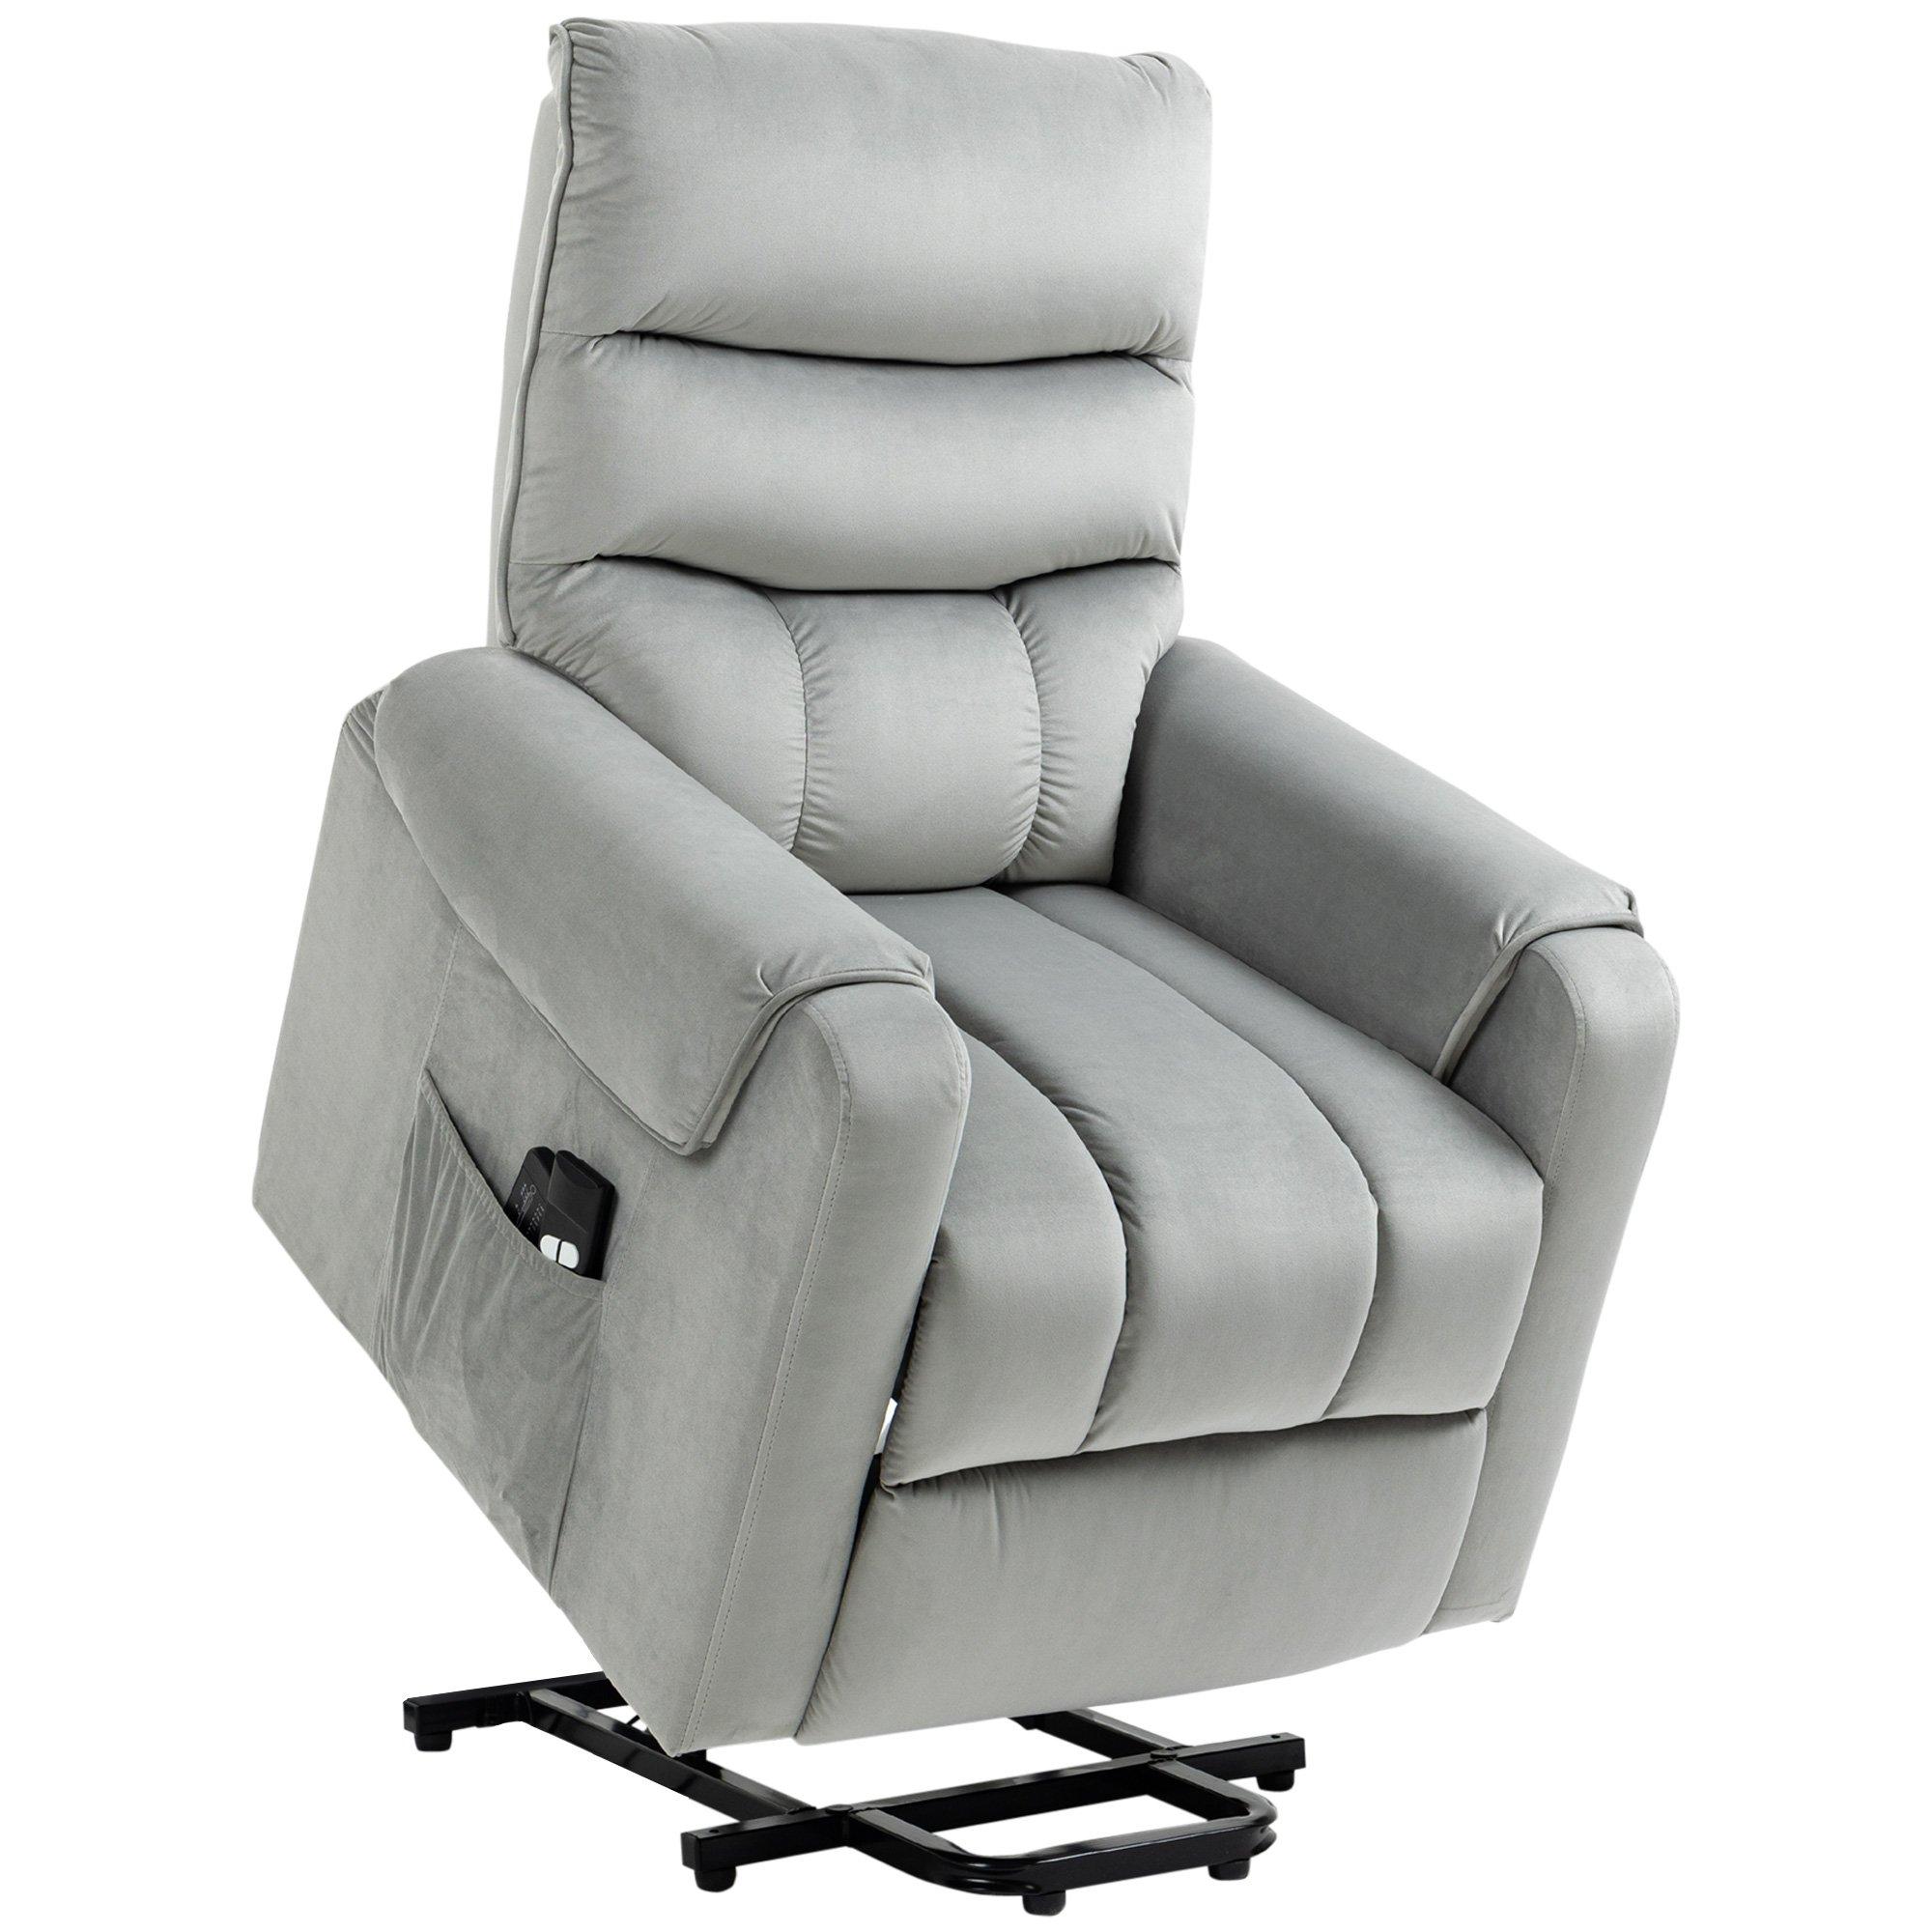 Electric Power Lift Recliner Vibration Massage Upholstered Reclining Chair